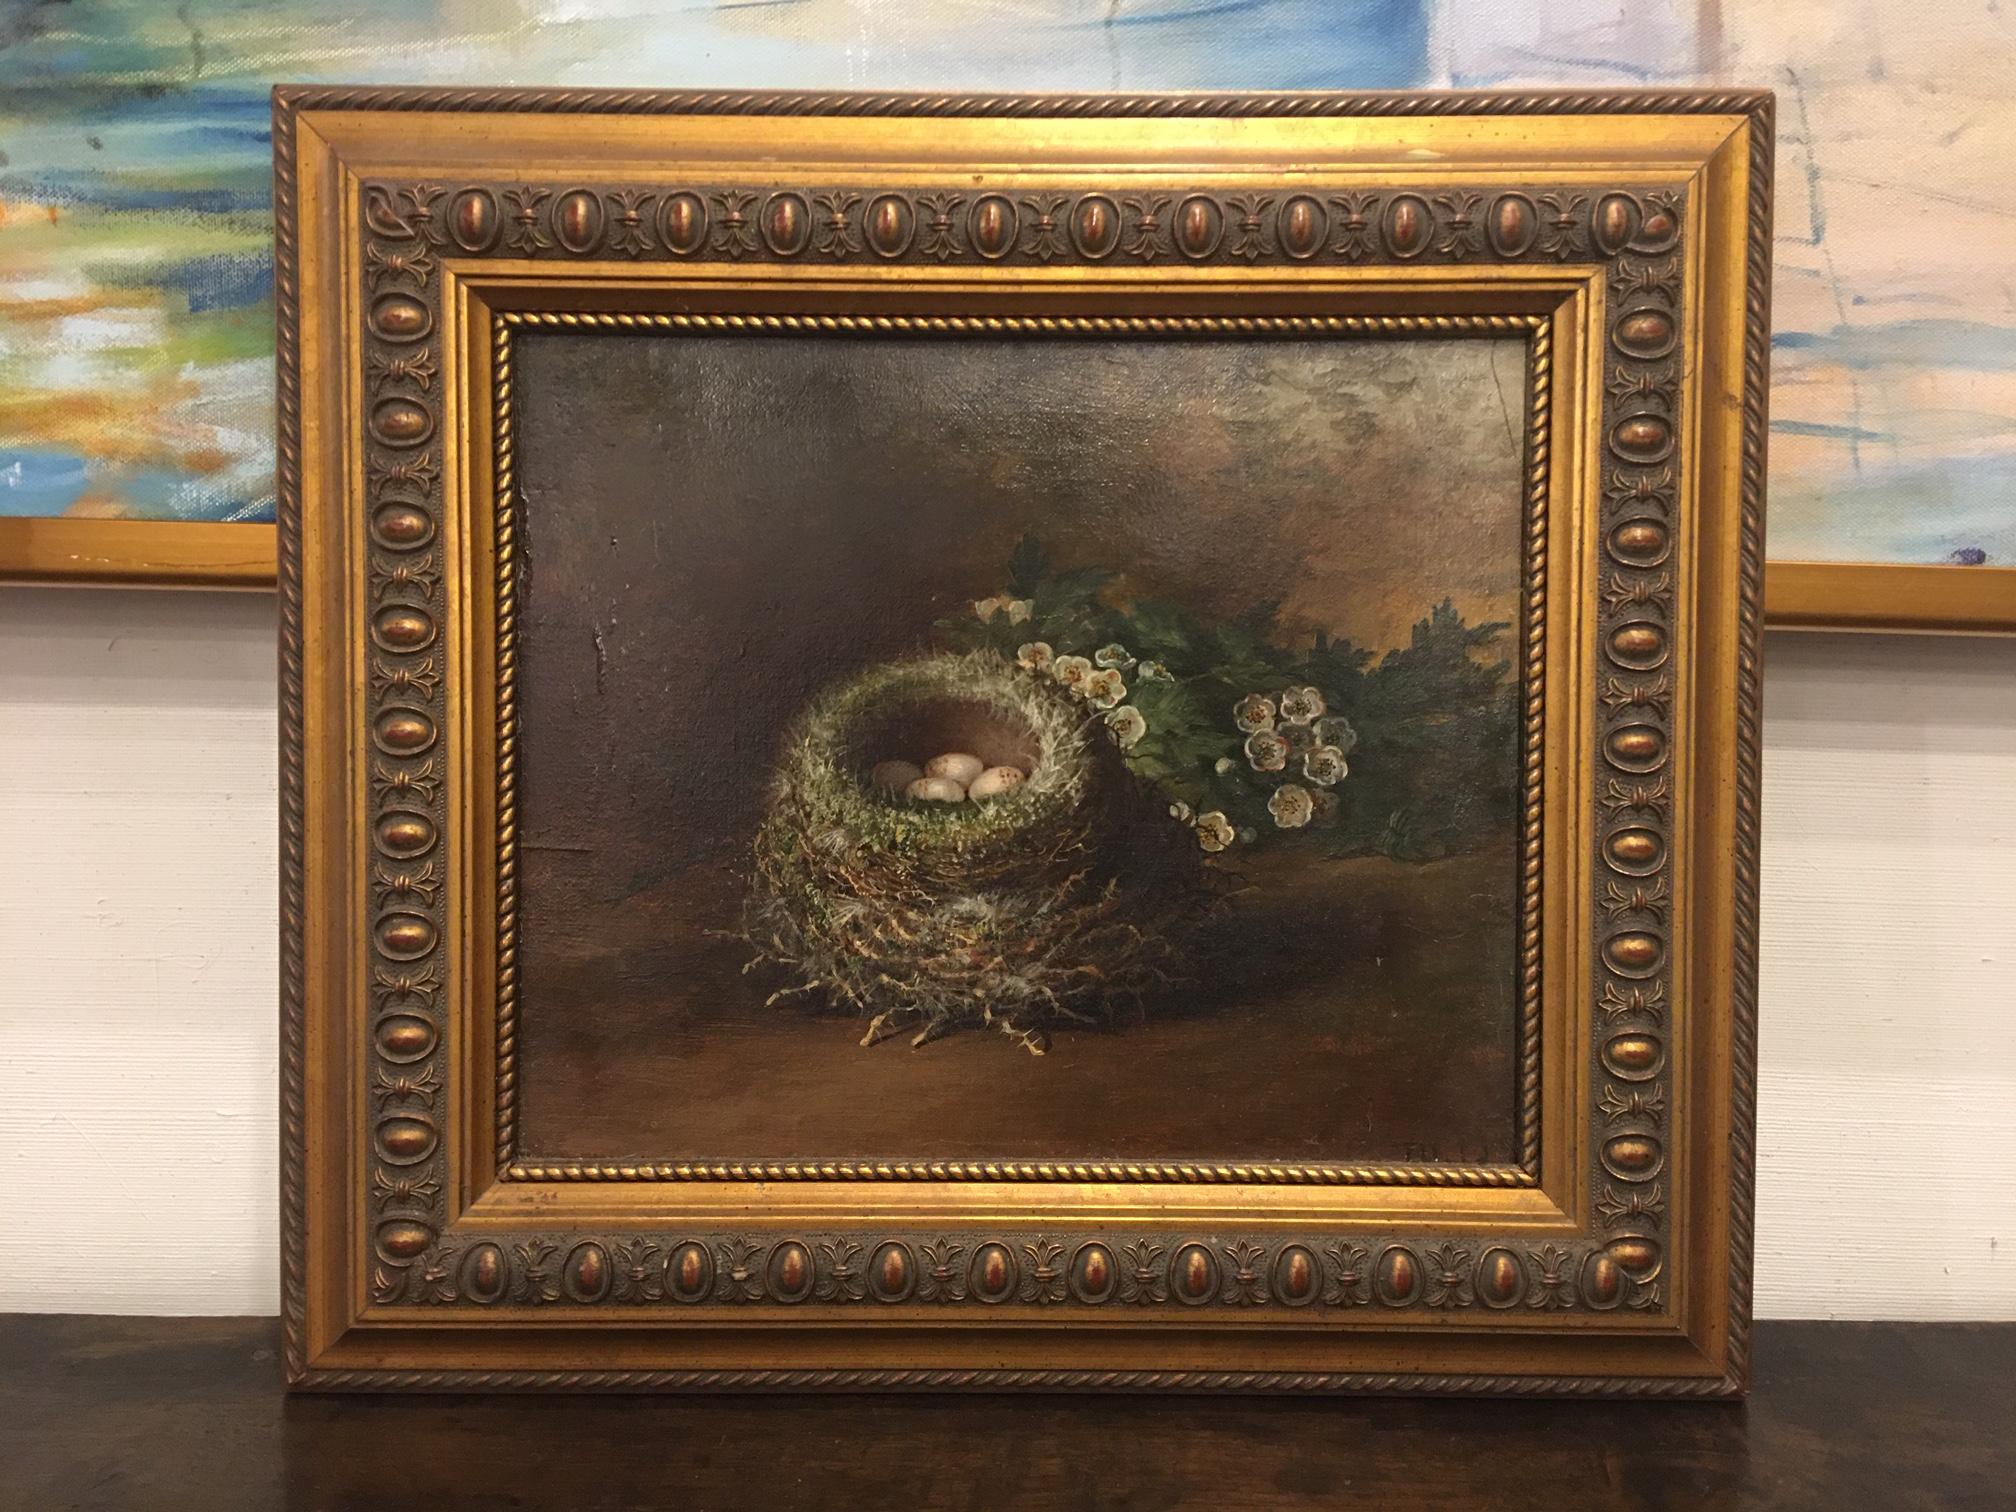 19th century framed painting on canvas, The Bird's Nest, signed lower right T Hold (Tom Hold, British, 19th century), retaining stamp on canvas verso.

Tom Hold (1843-?)
The grandson of Thomas and Mary Hold and son of Abel Hold. Tom was born in 1843